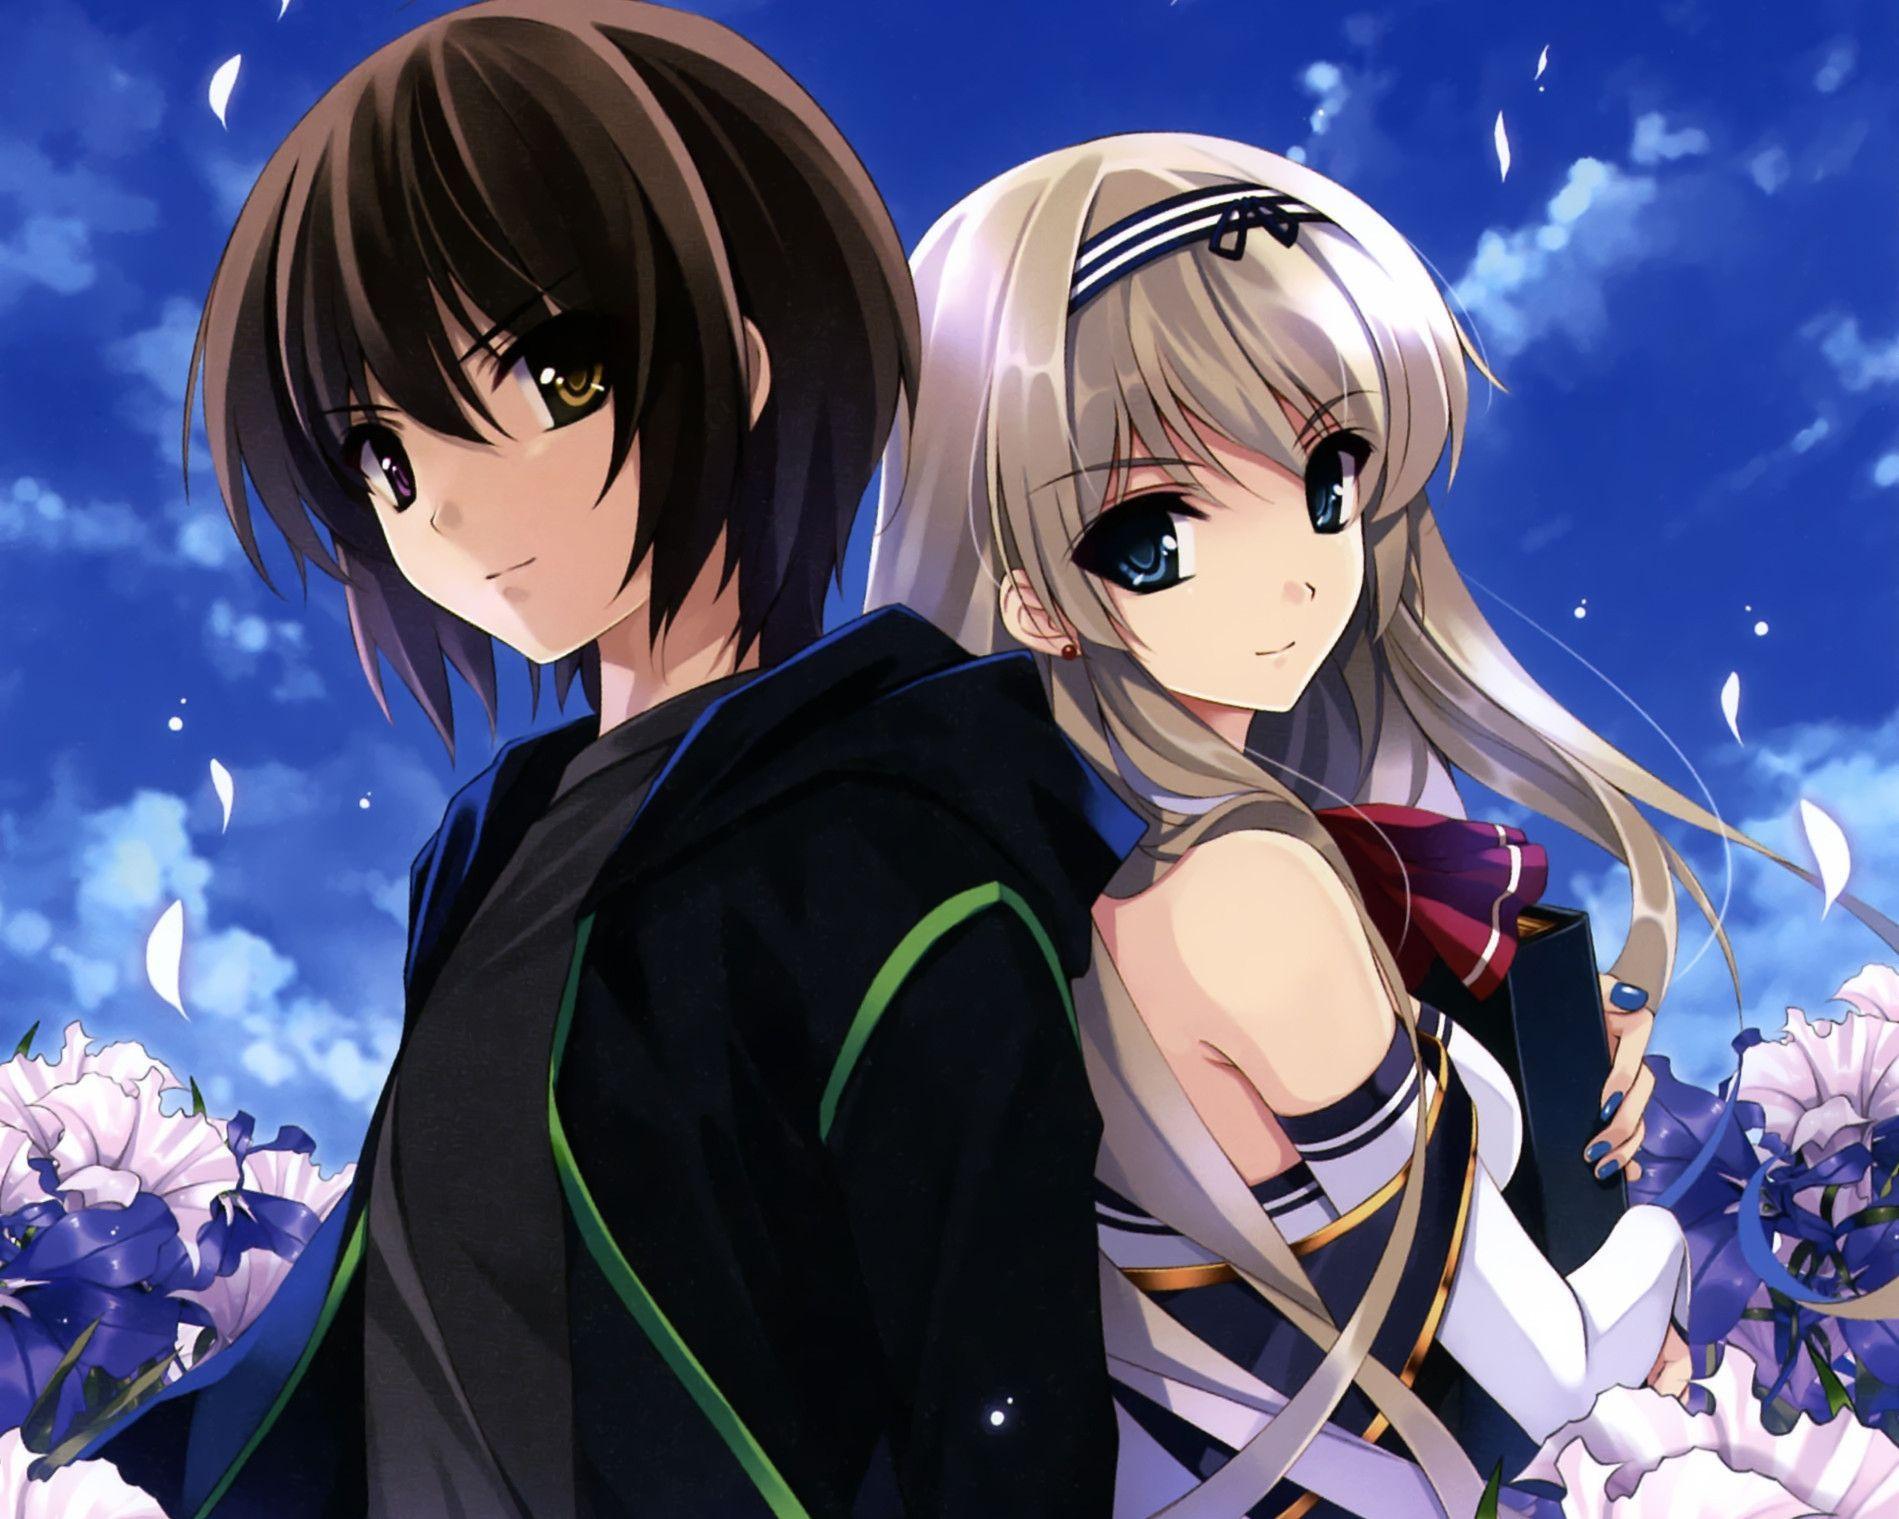 Download Cute Anime Couple Wallpaper